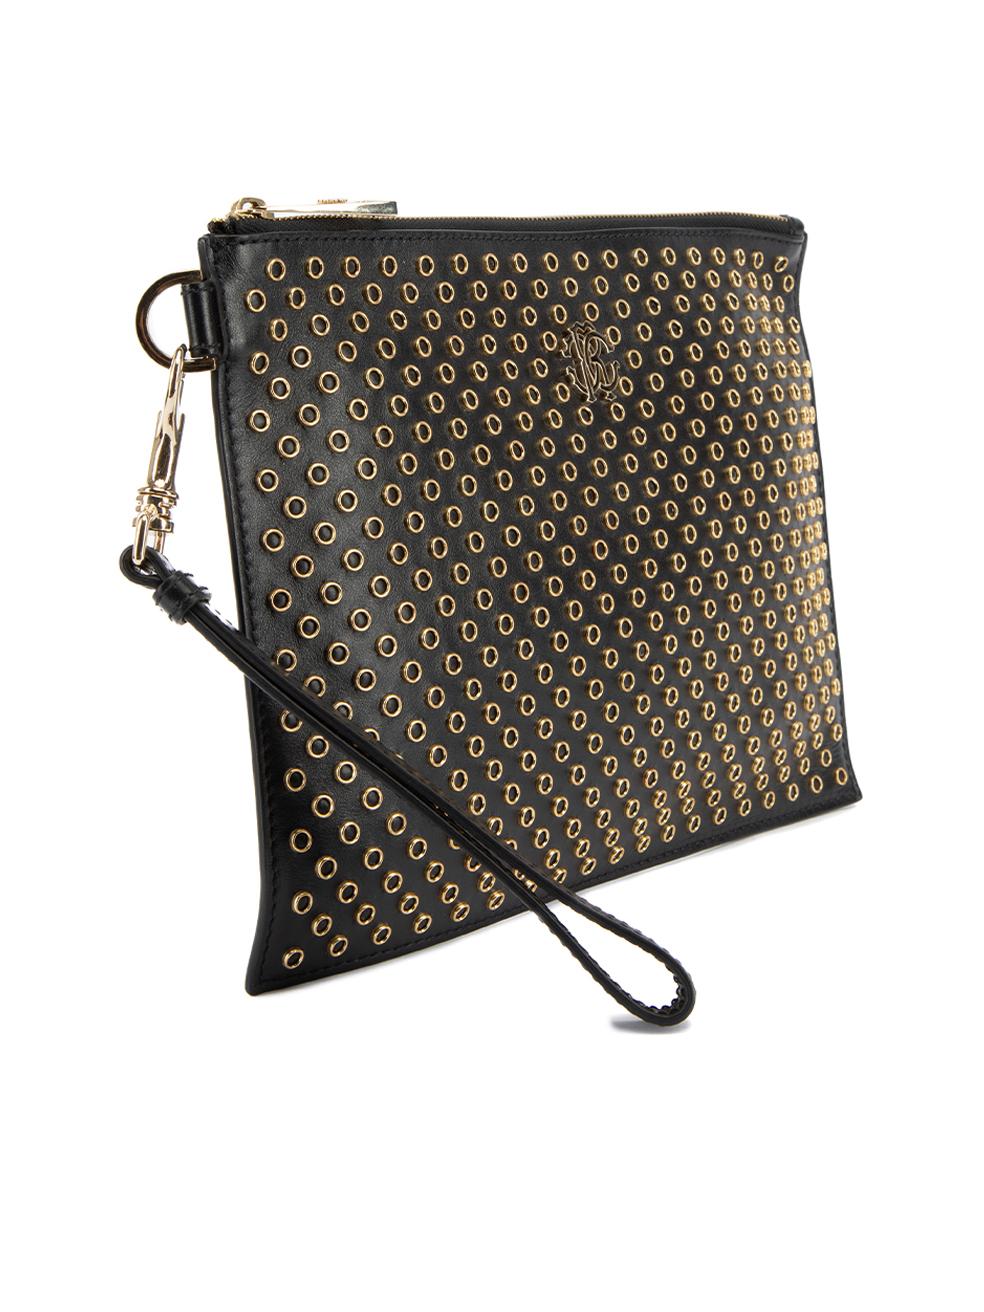 CONDITION is Very good. Hardly any visible wear to clutch is evident on this used Roberto Cavalli designer resale item. This item comes with original dustbag.  Details  Black Leather Large rectangle clutch Gold studs embellishment Front branded logo